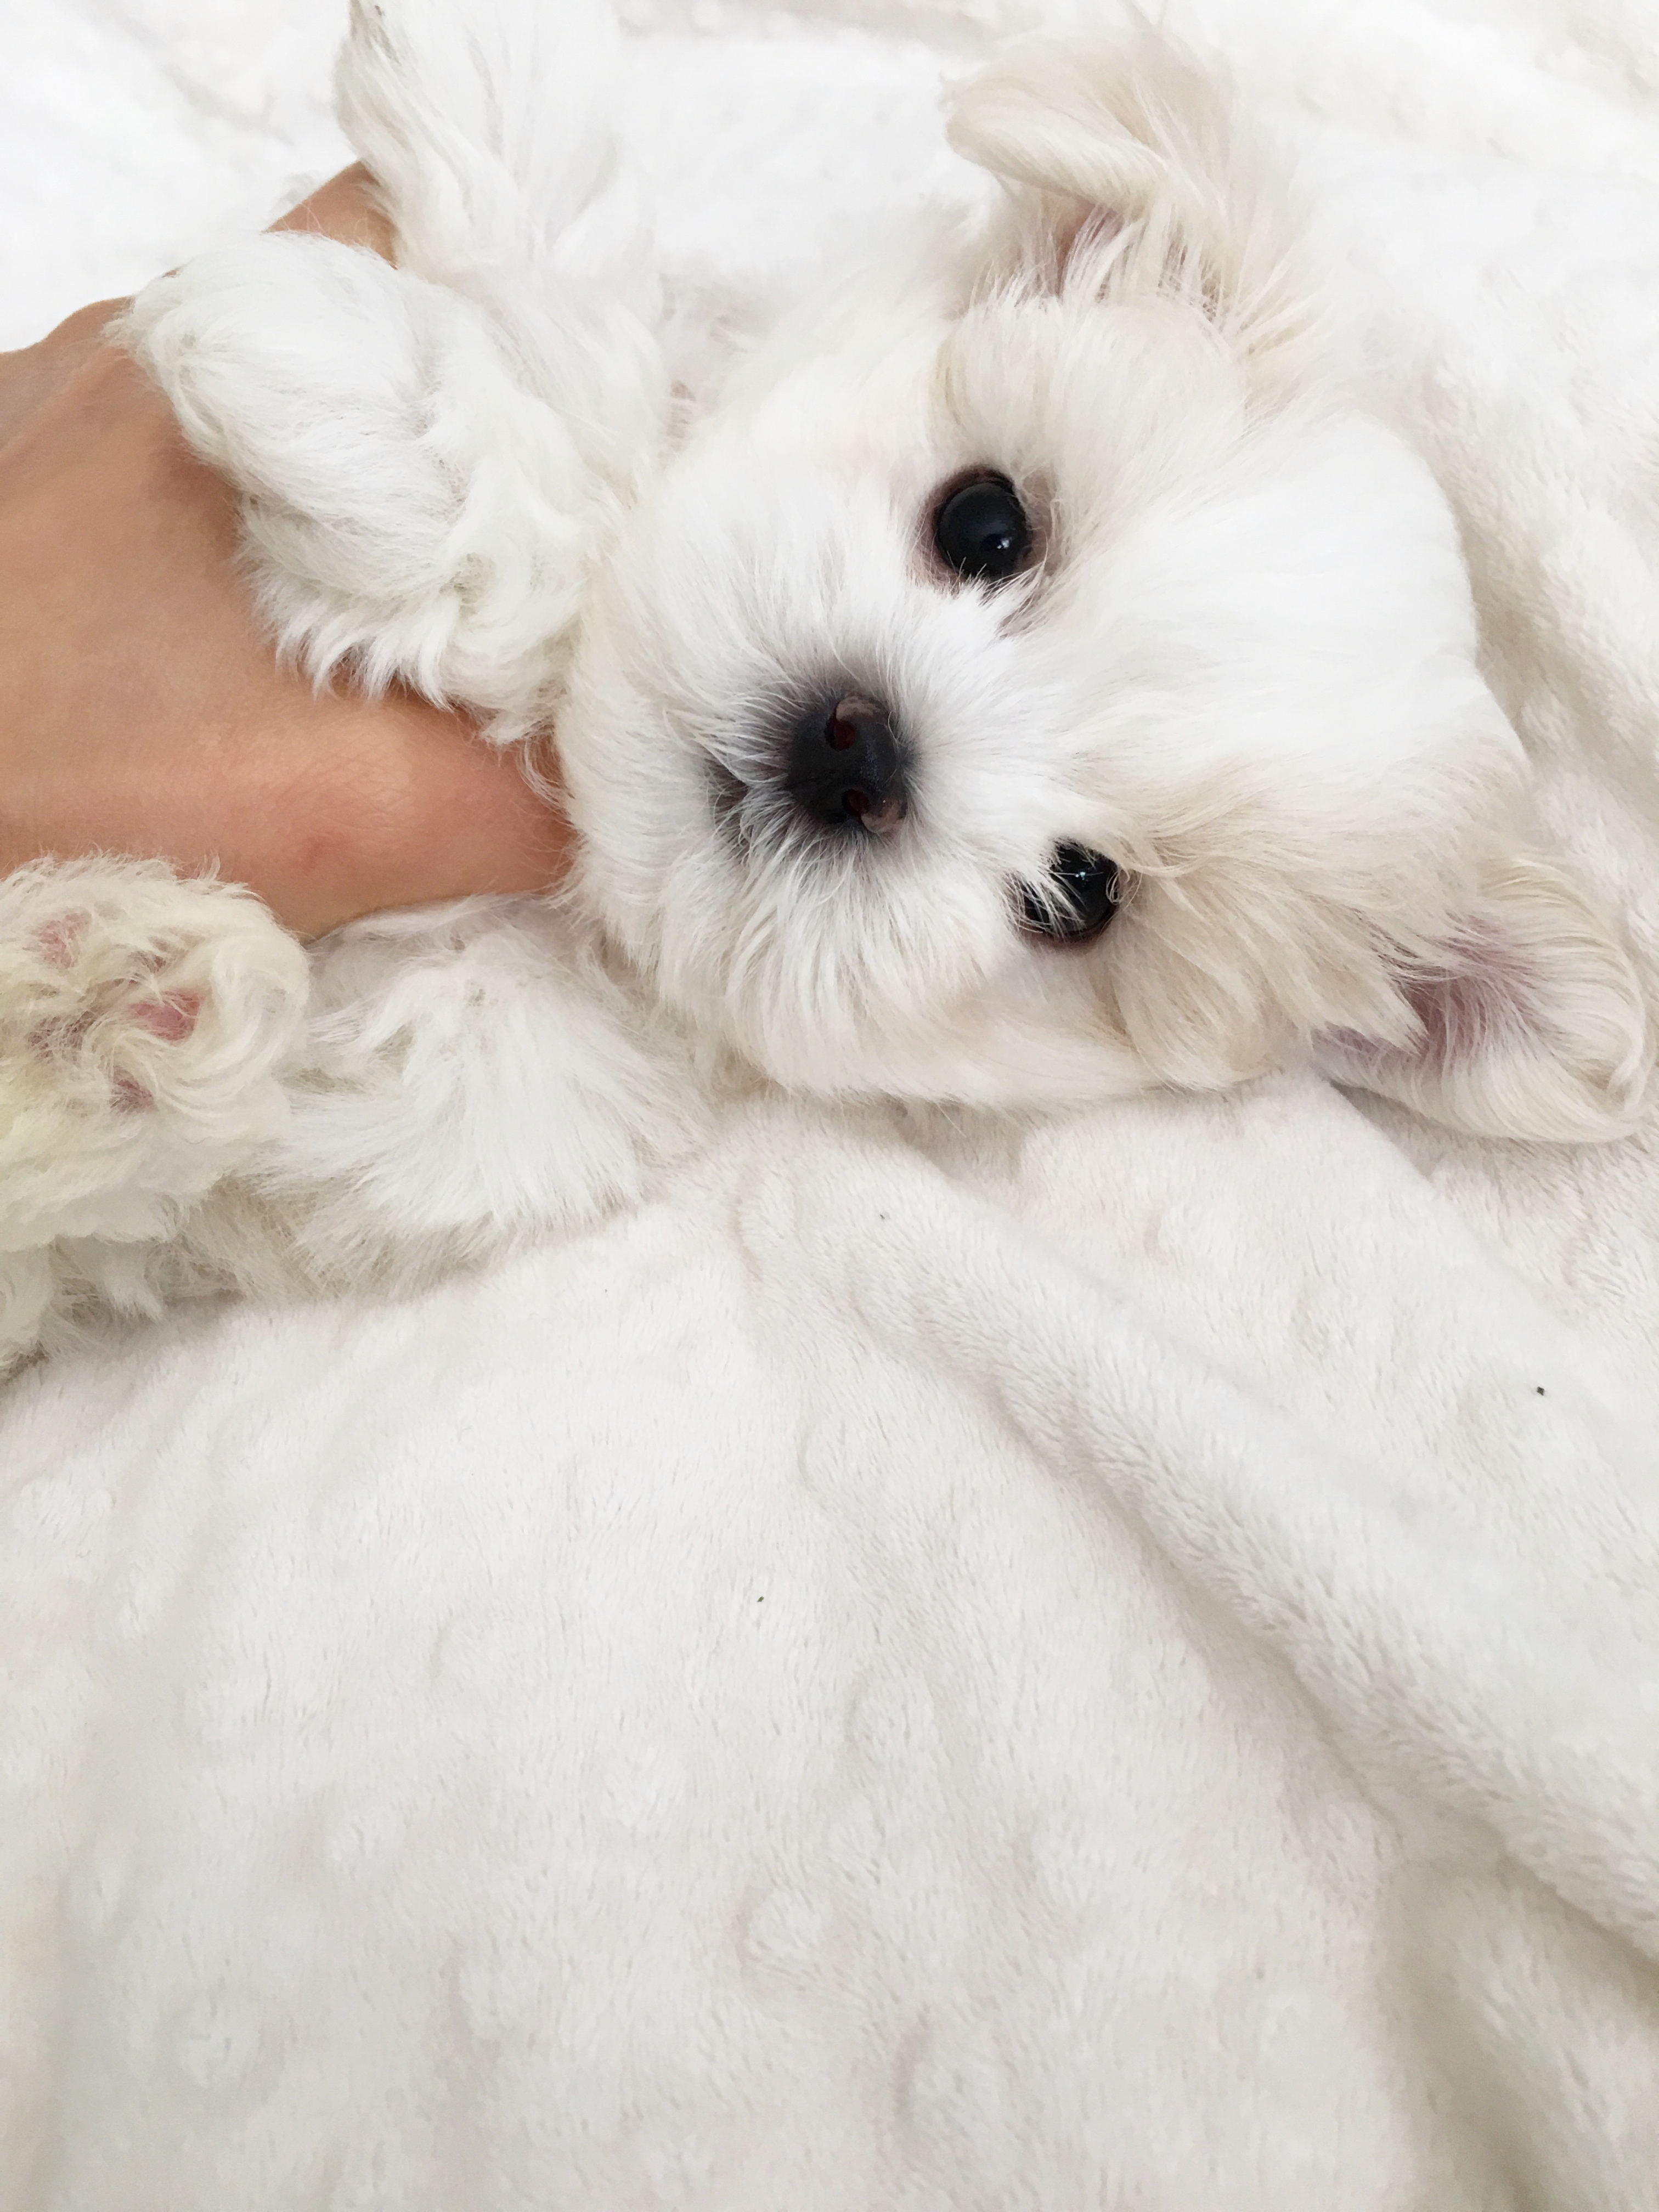 Teacup Maltese Puppy for sale! | iHeartTeacups